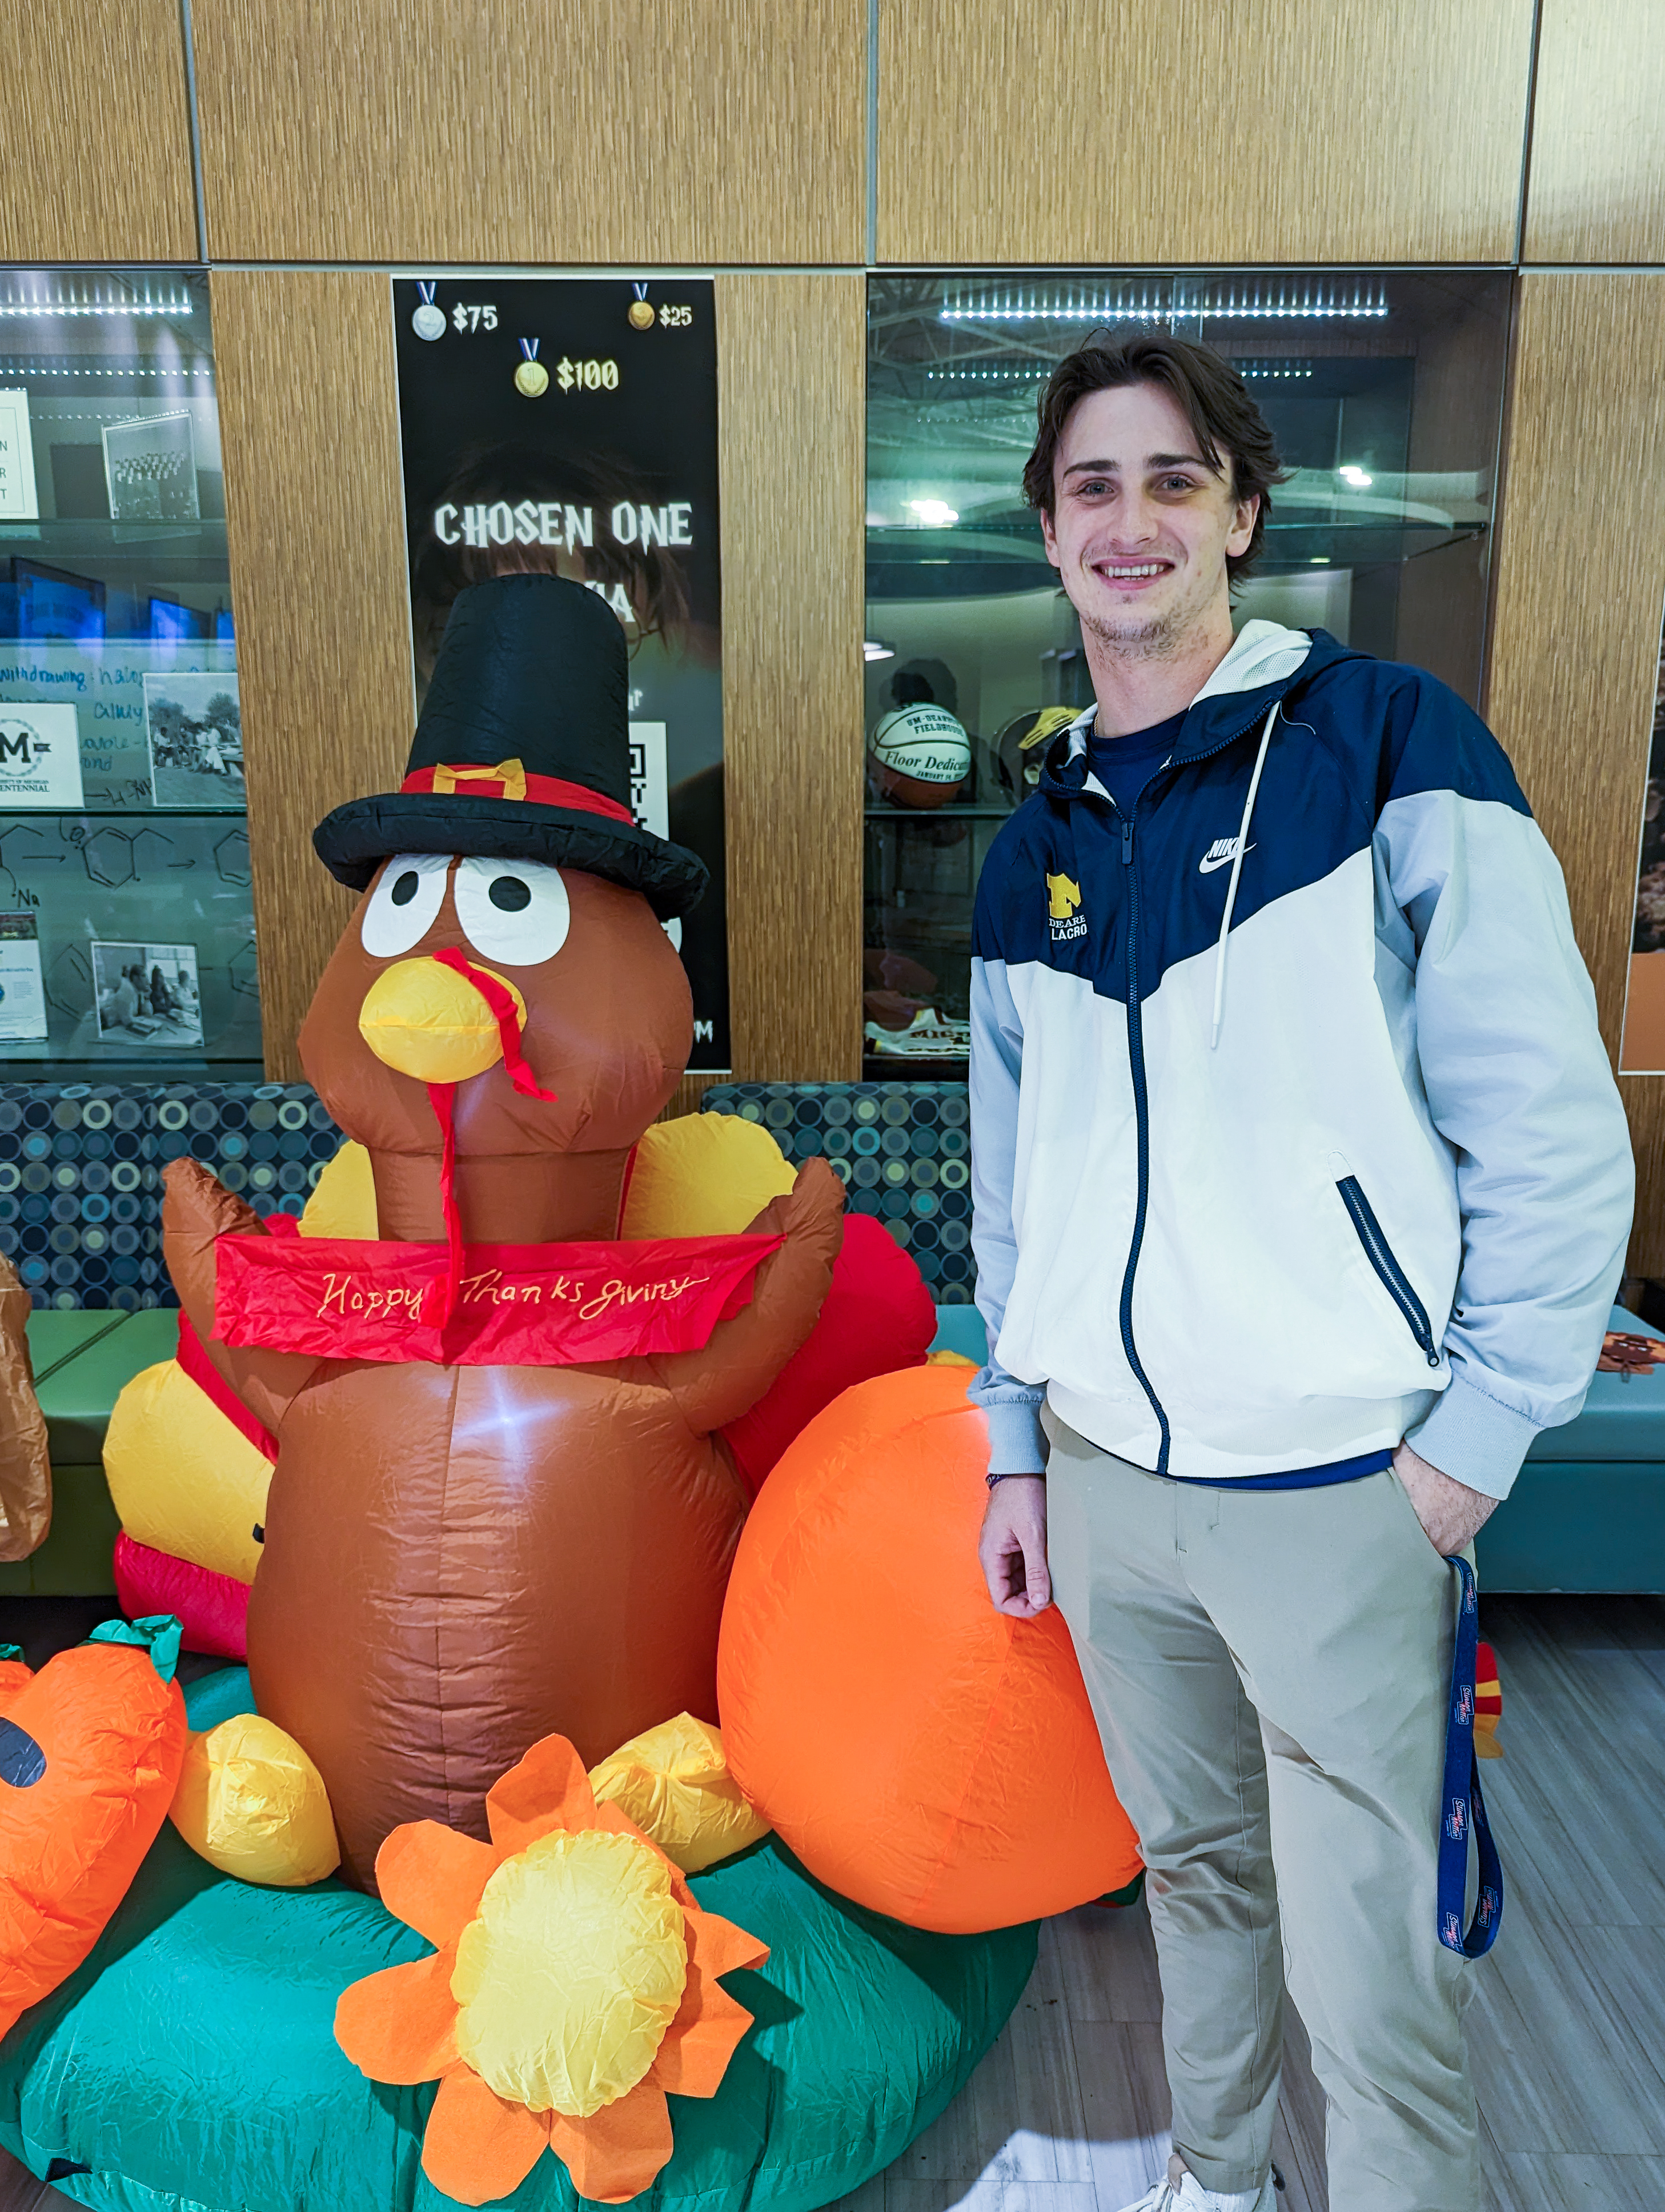 Student Joe Atherall poses near a giant inflatable turkey decoration at the 2022 UM-Dearborn Friendsgiving